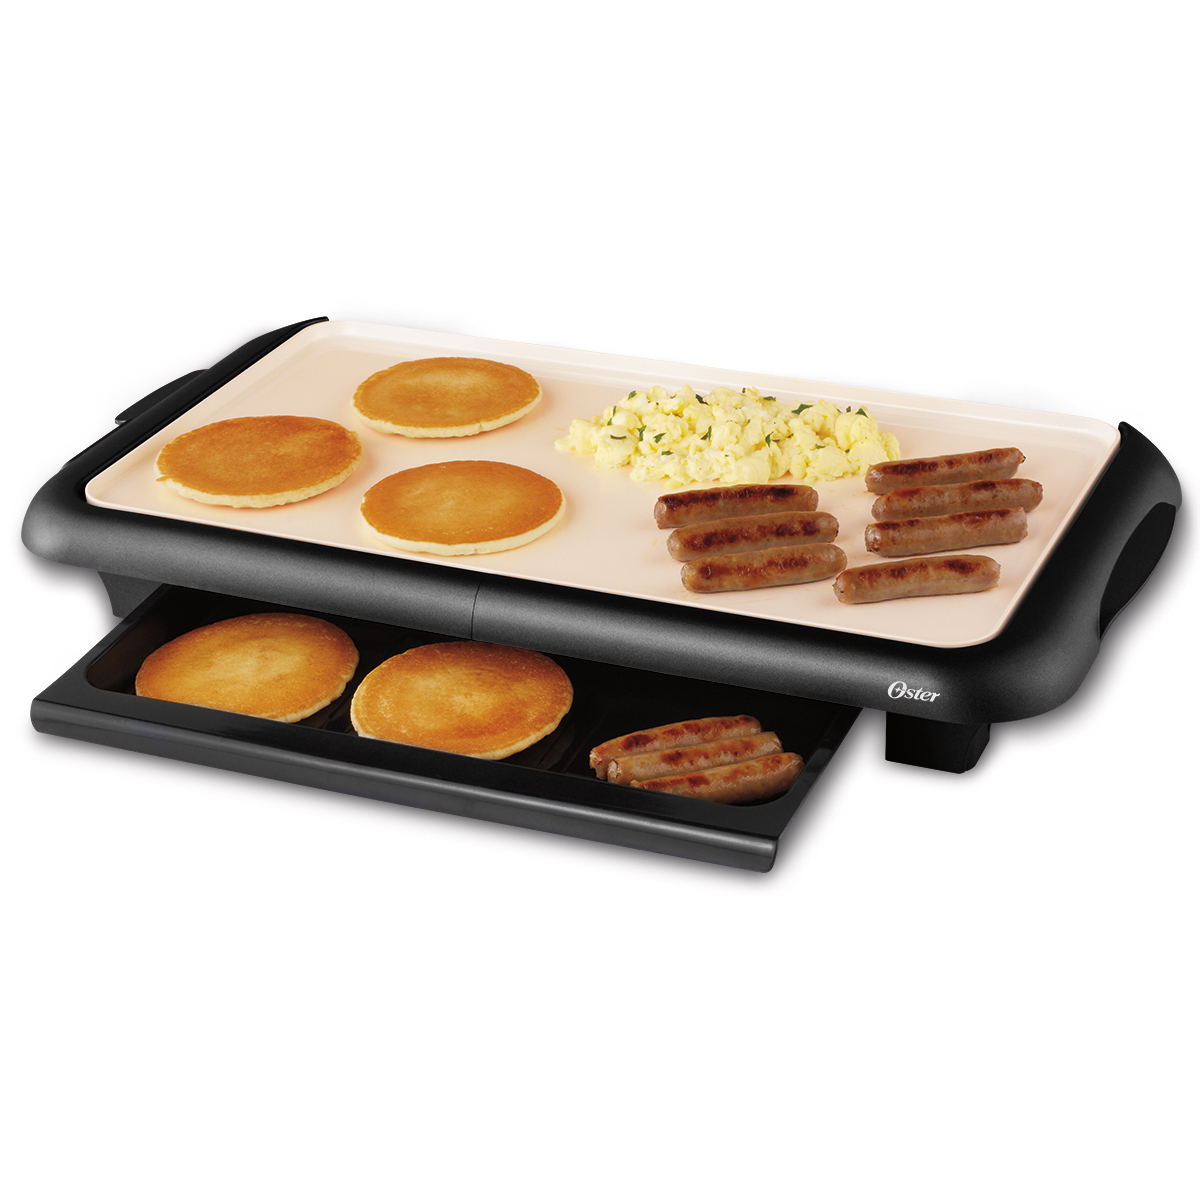 Oster Electric Griddle with Warming Tray - image 1 of 10